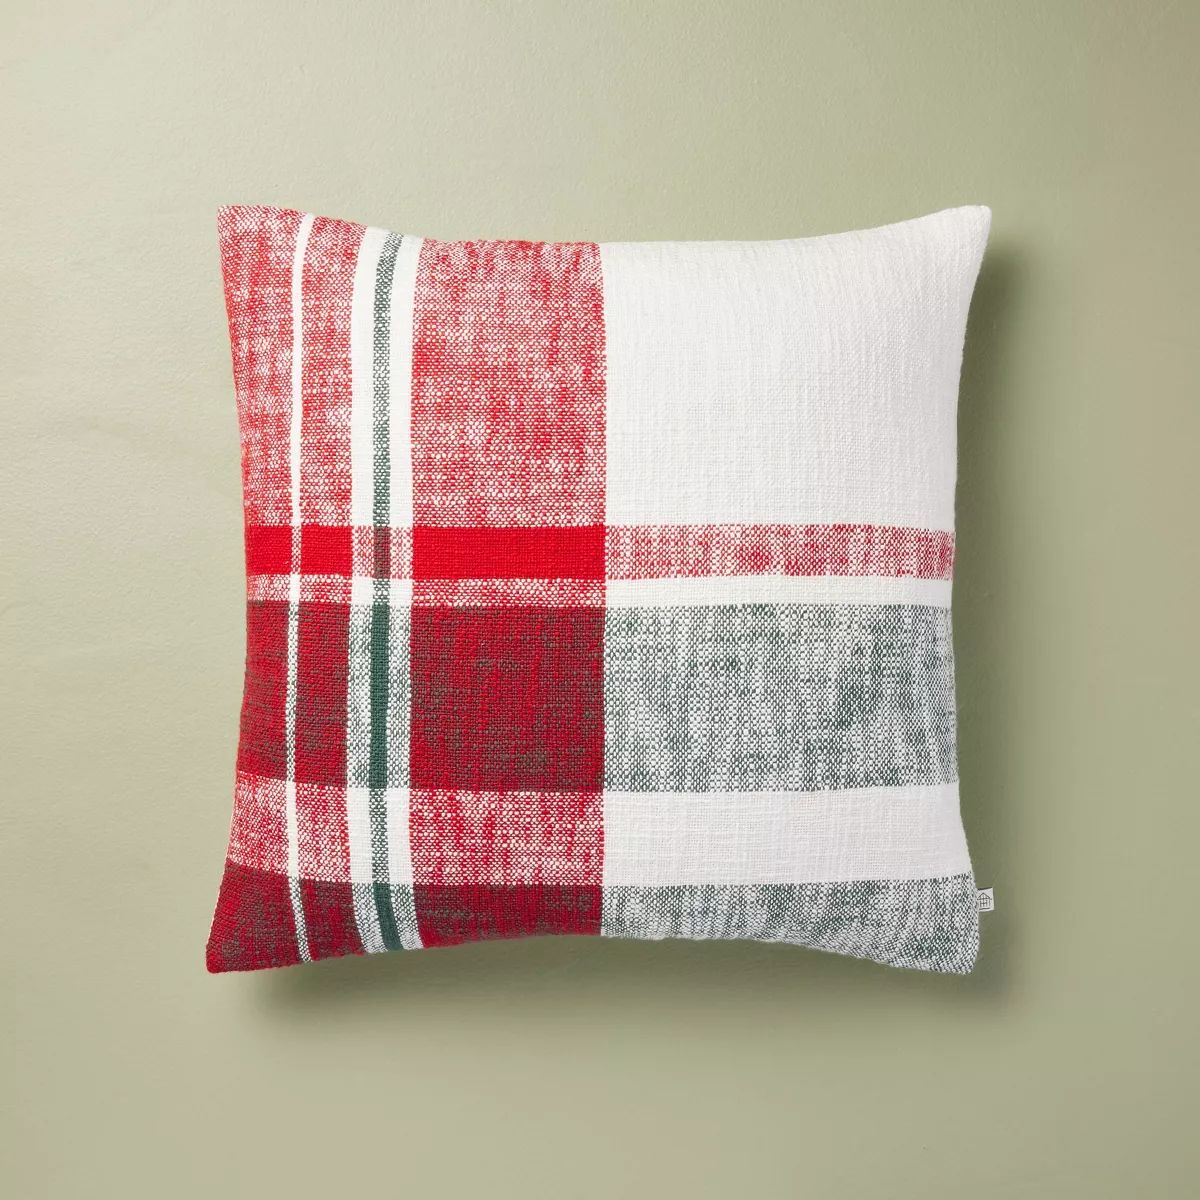 Festive Plaid Square Christmas Throw Pillow Red/Green/Cream - Hearth & Hand™ with Magnolia | Target